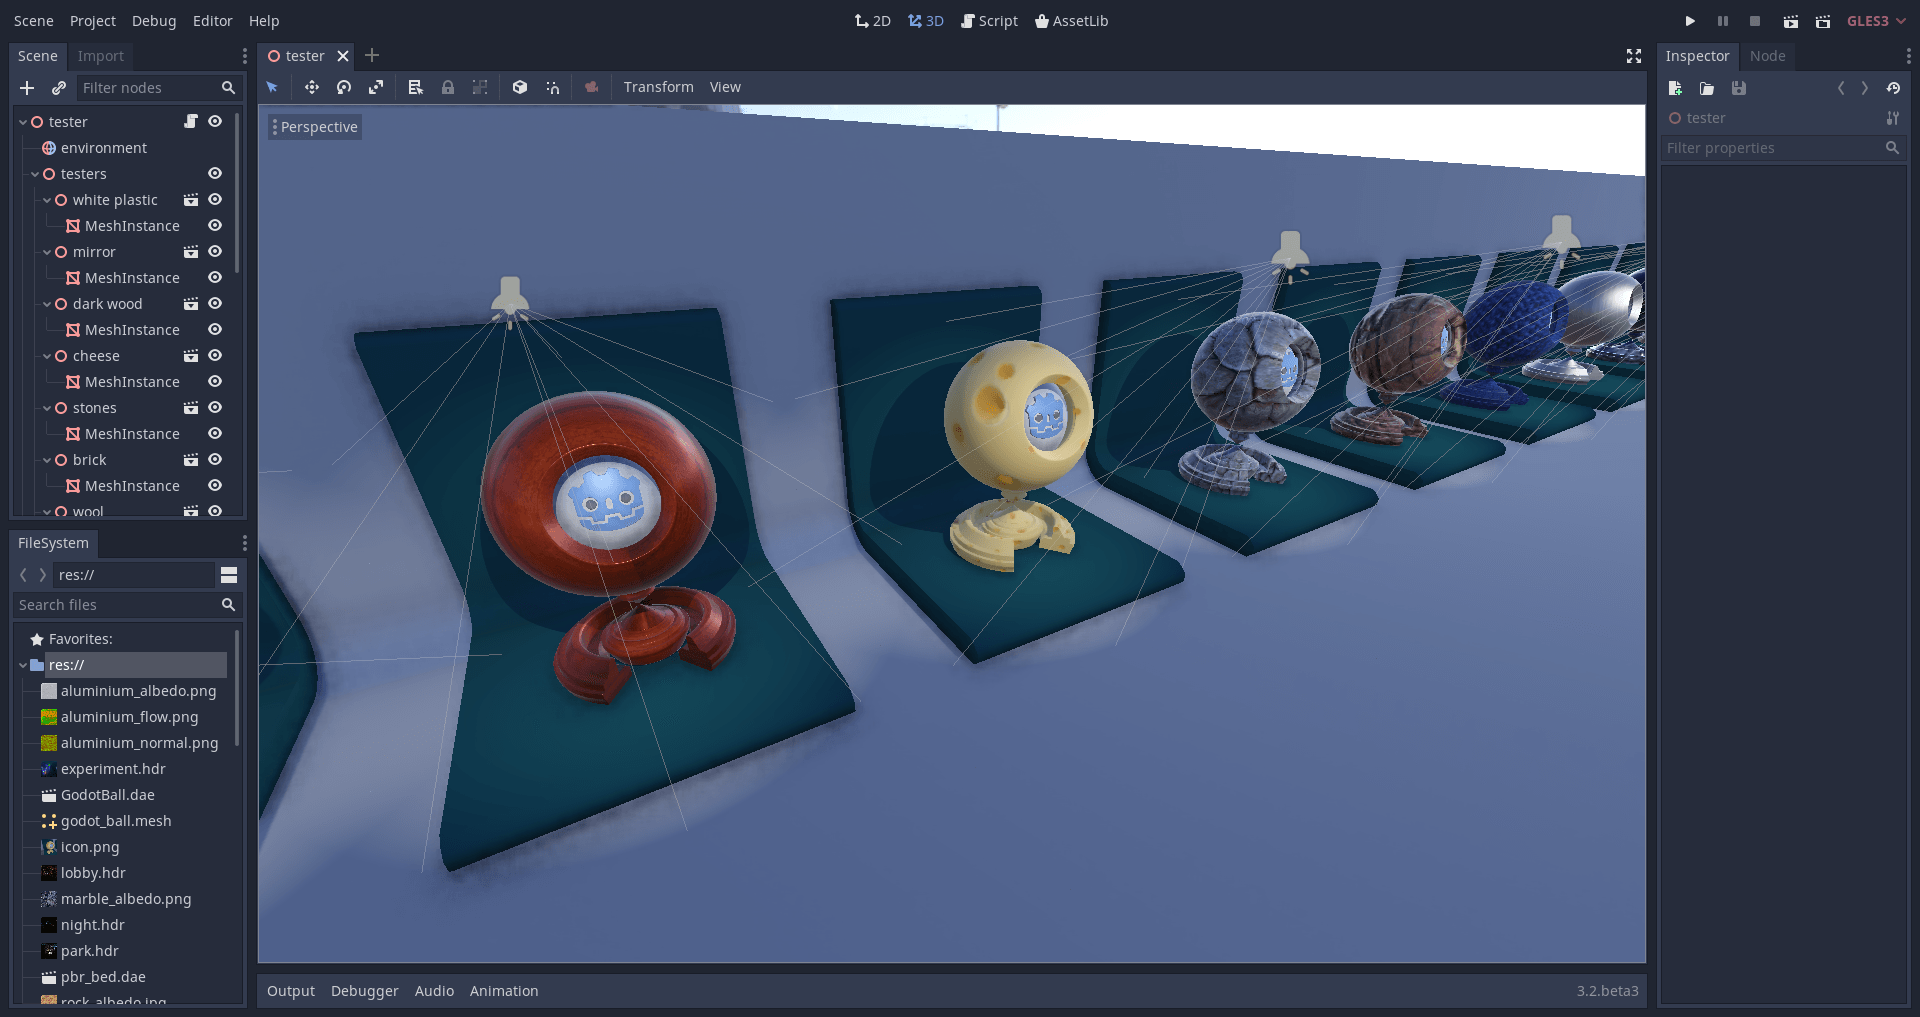 _images/editor_ui_intro_editor_05_3d_workspace.png